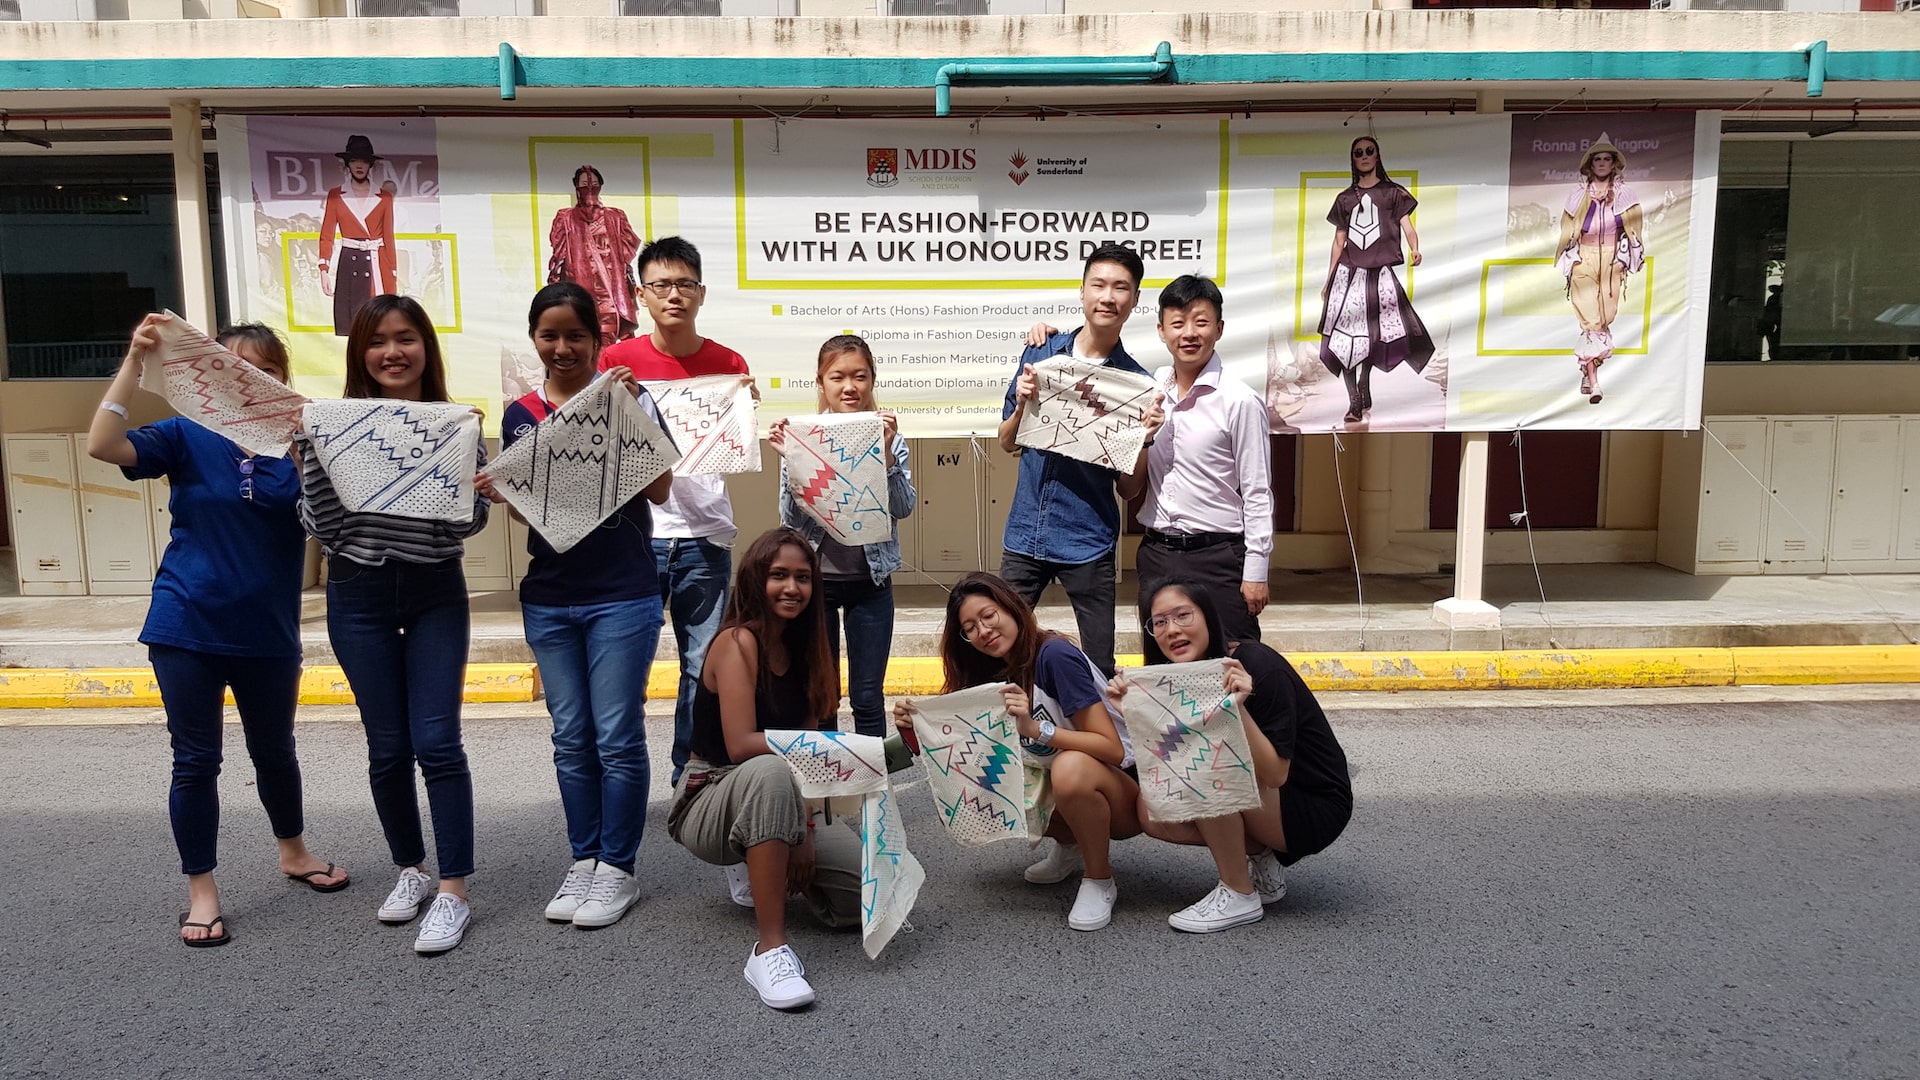 MDIS college students posing with their finished artwork outside of the fashion lab.